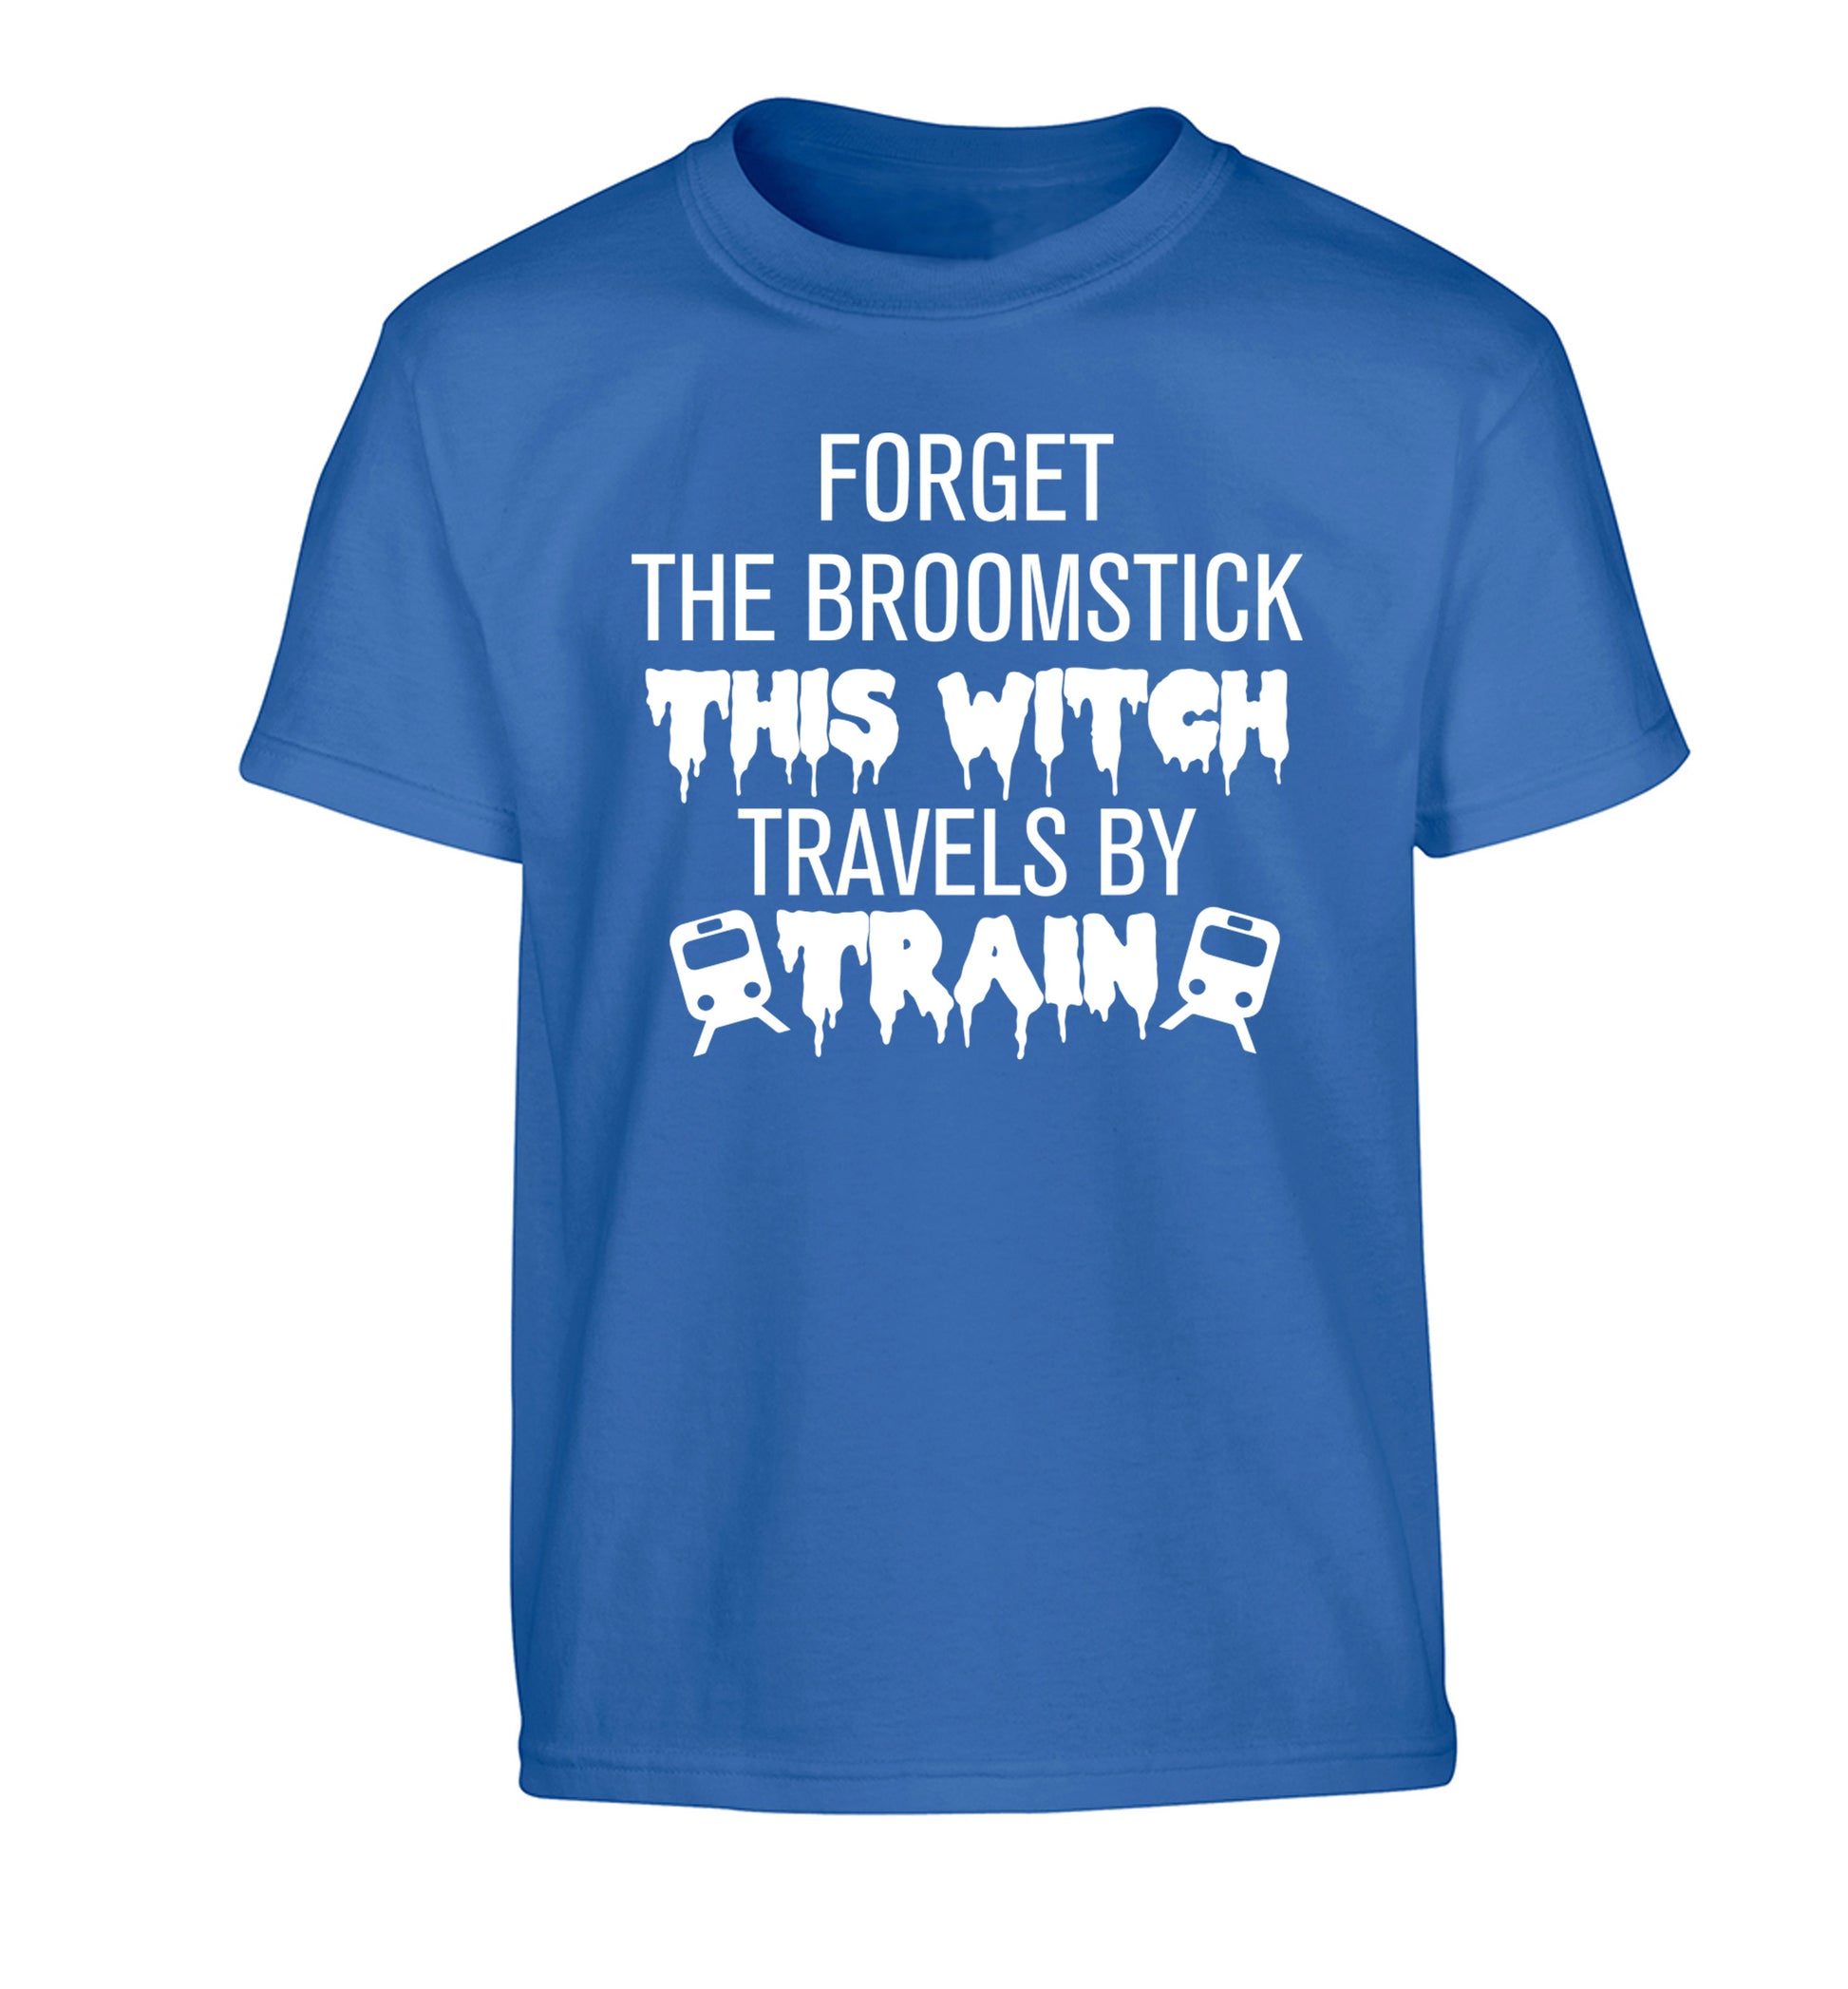 Forget the broomstick this witch travels by train Children's blue Tshirt 12-14 Years